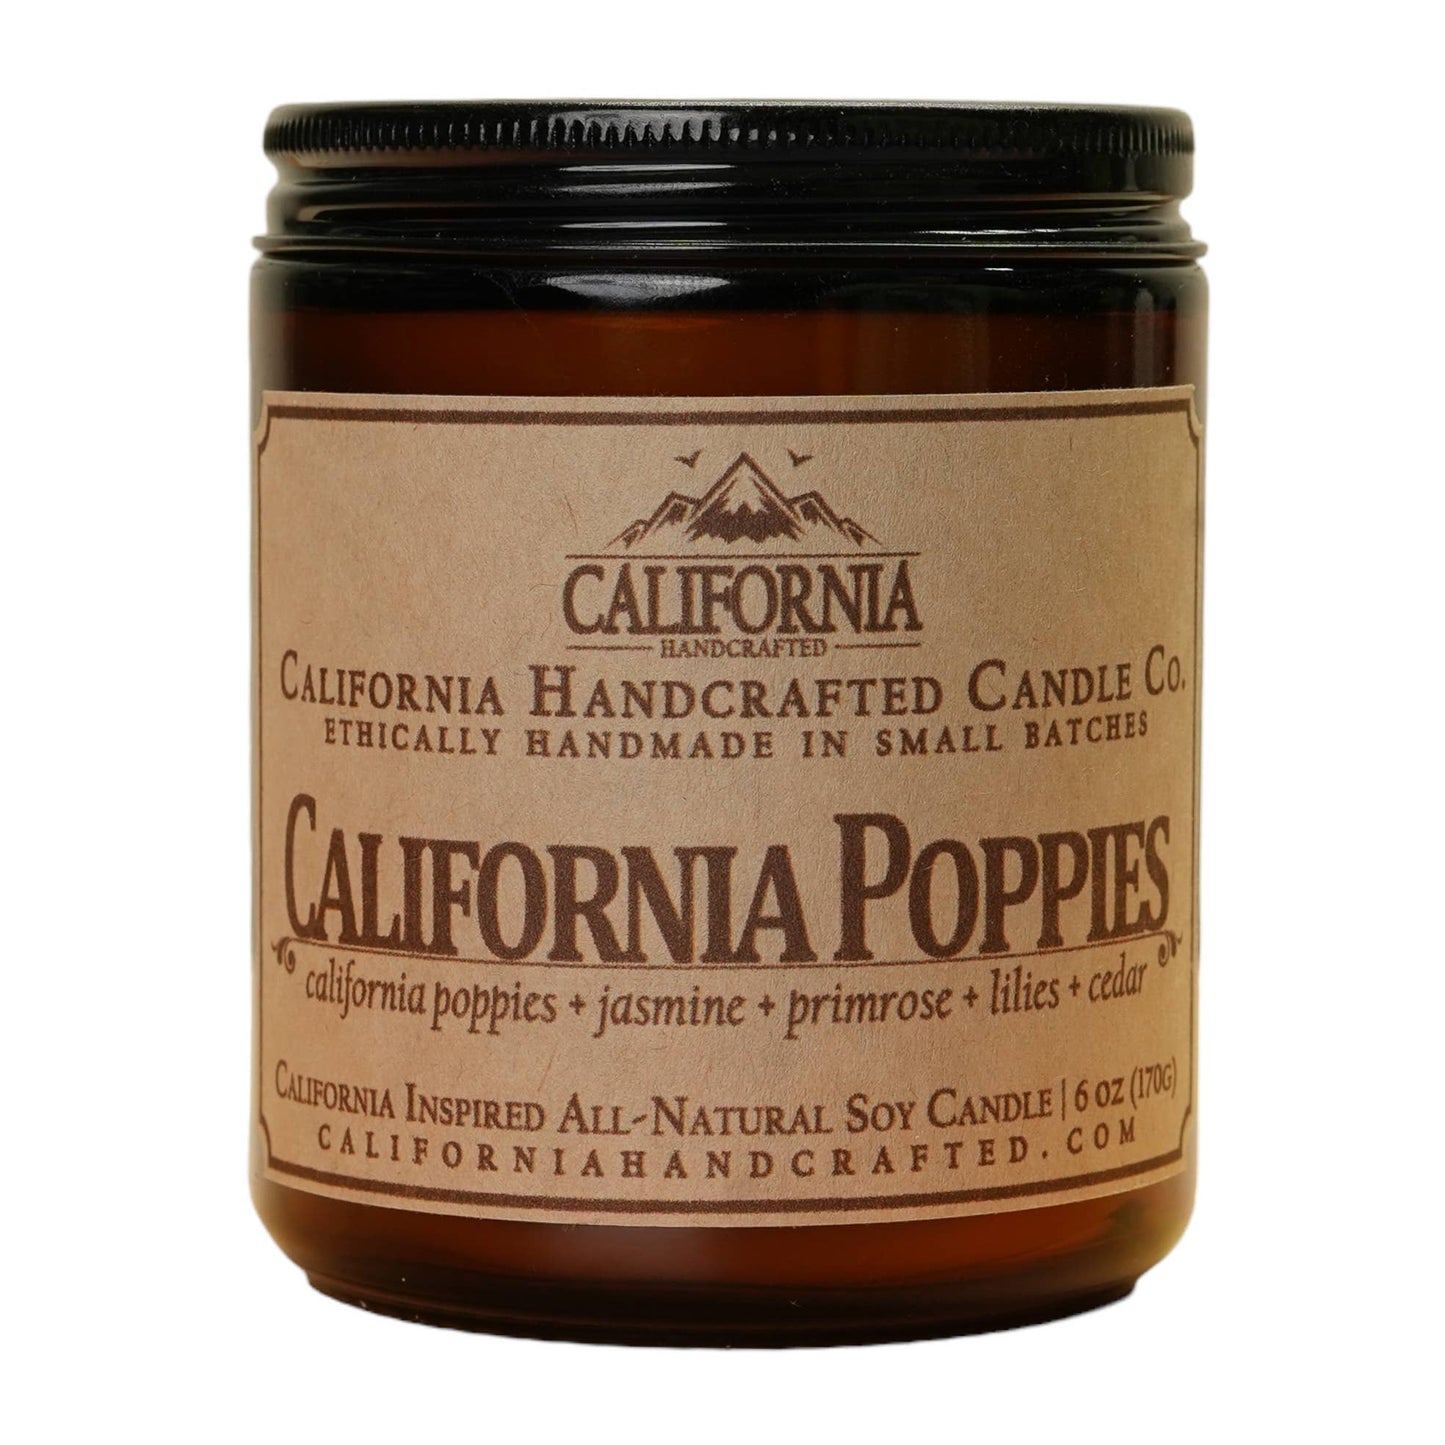 California Poppies All-Natural Soy Candle